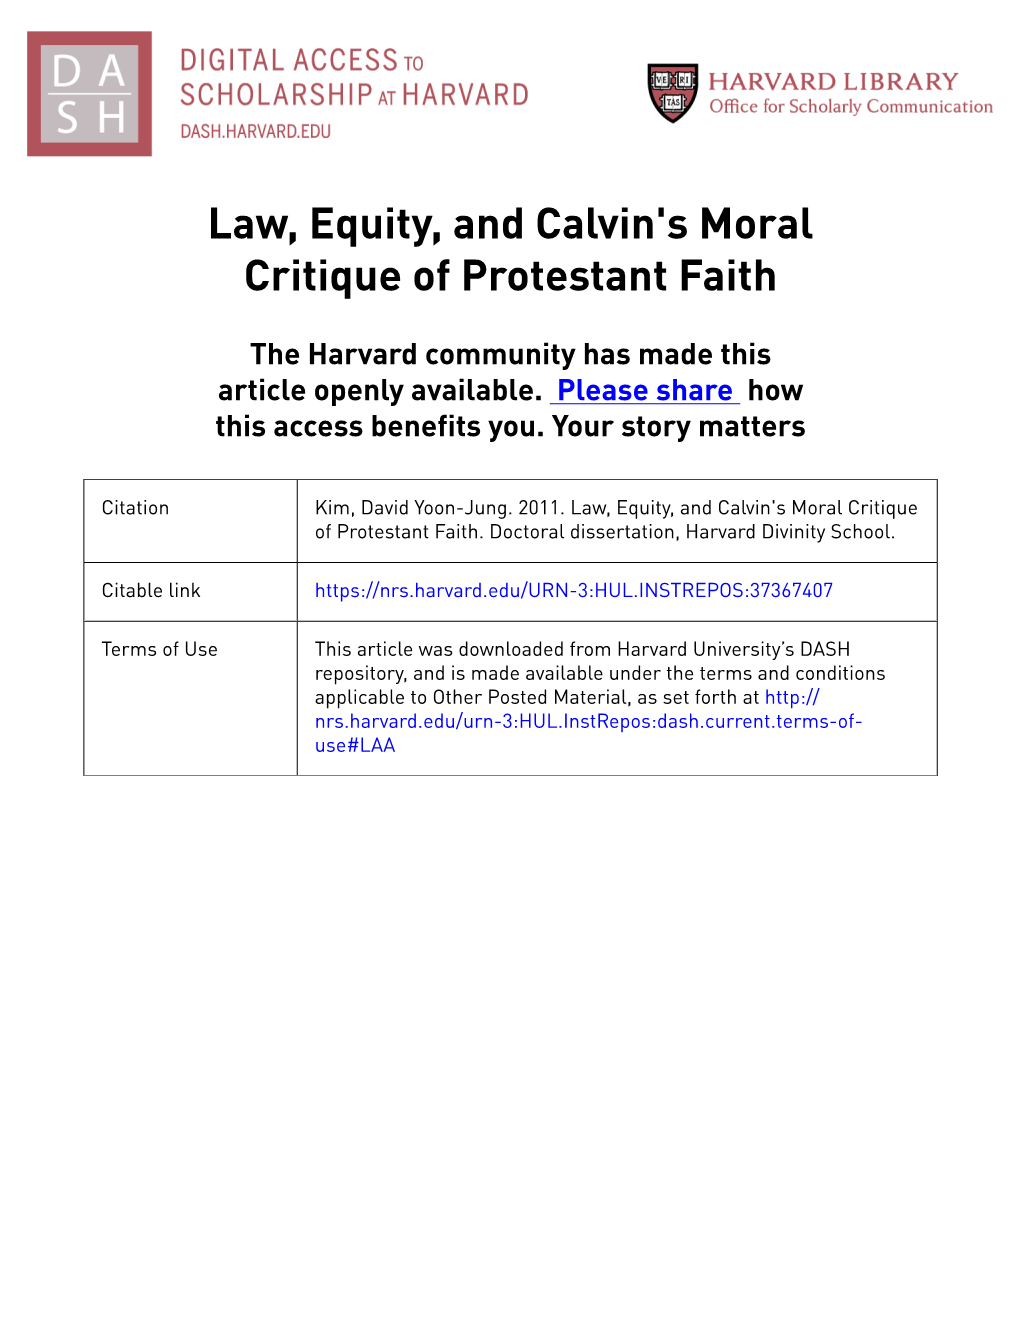 Law, Equity, and Calvin's Moral Critique of Protestant Faith